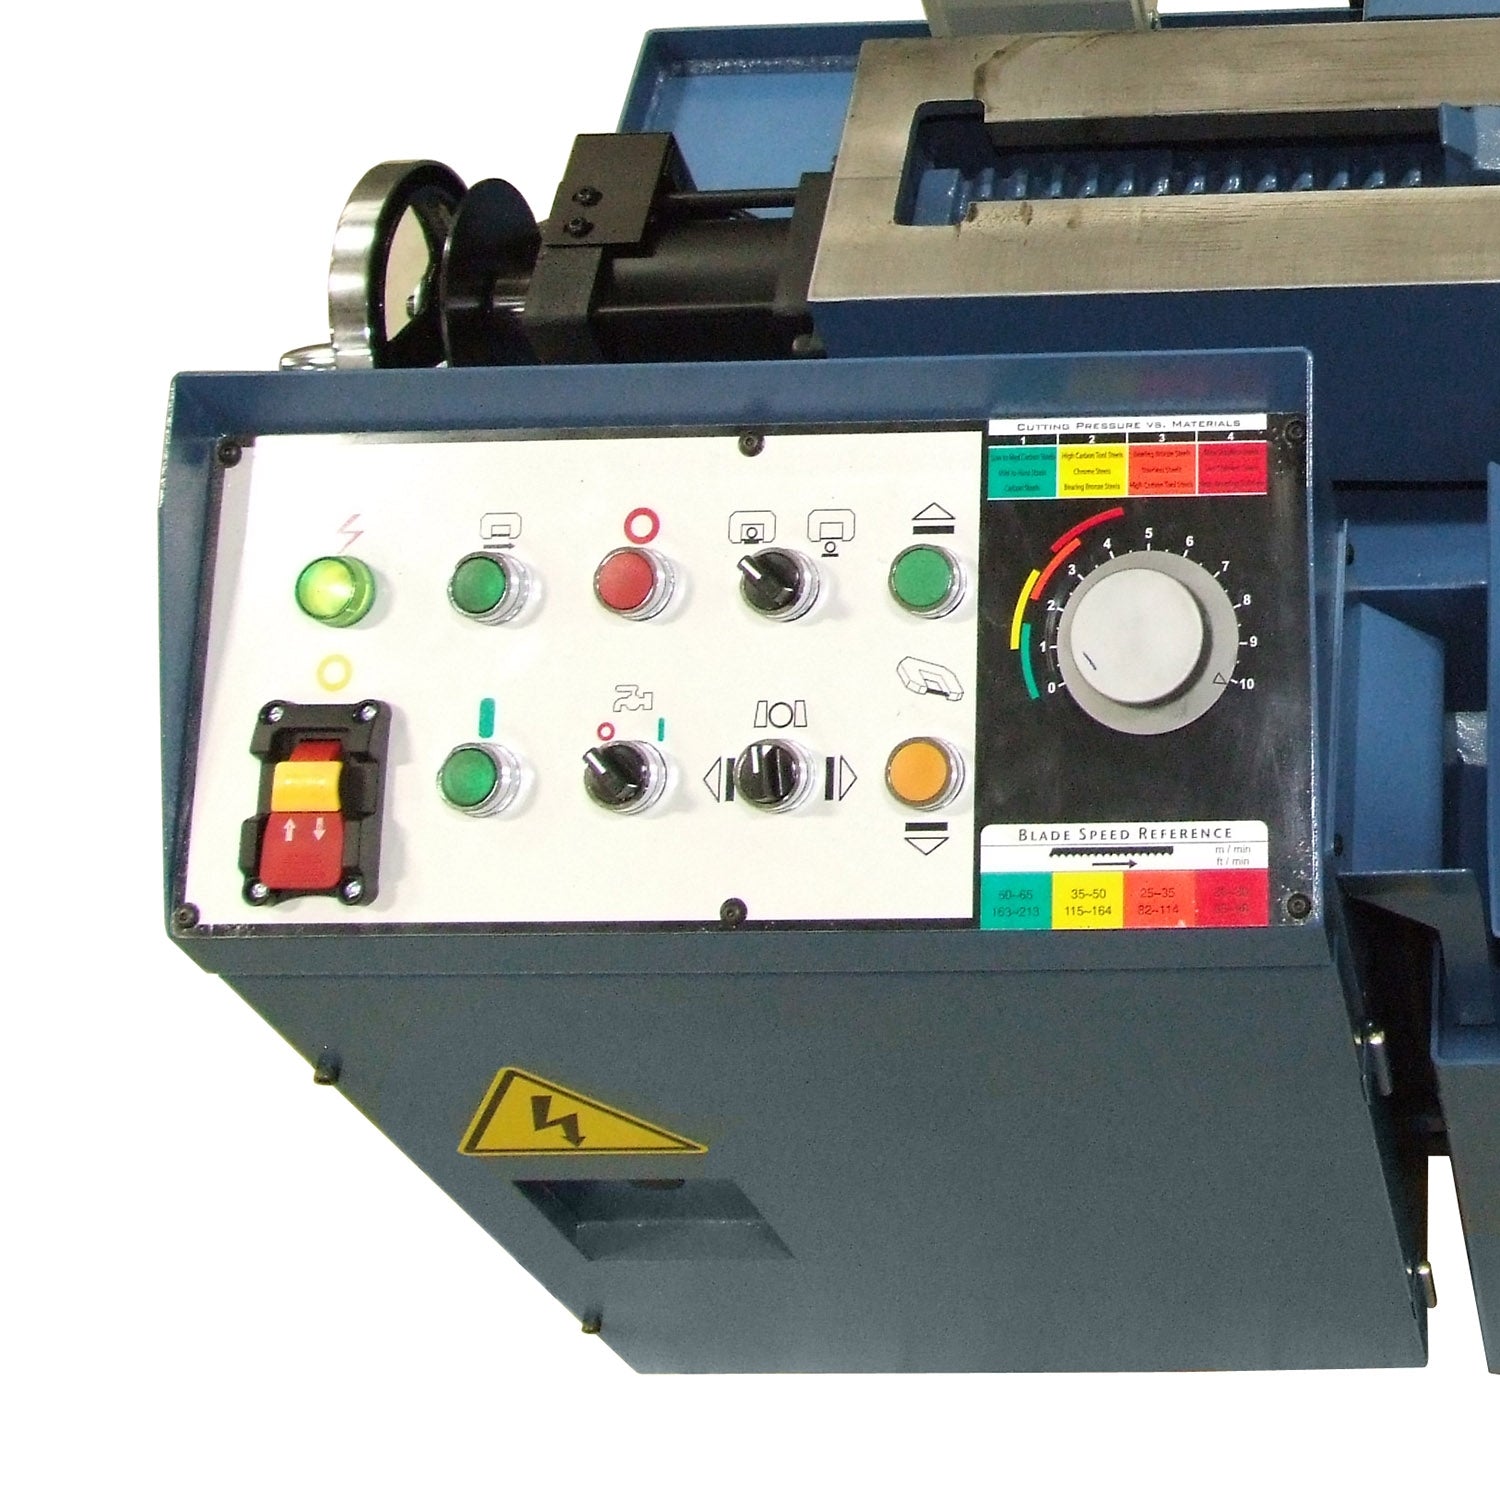 Baileigh BS-360SA 220V 3 Phase Column Type (Non-Mitering) Metal Cutting Band Saw 1-1/4" Blade Width